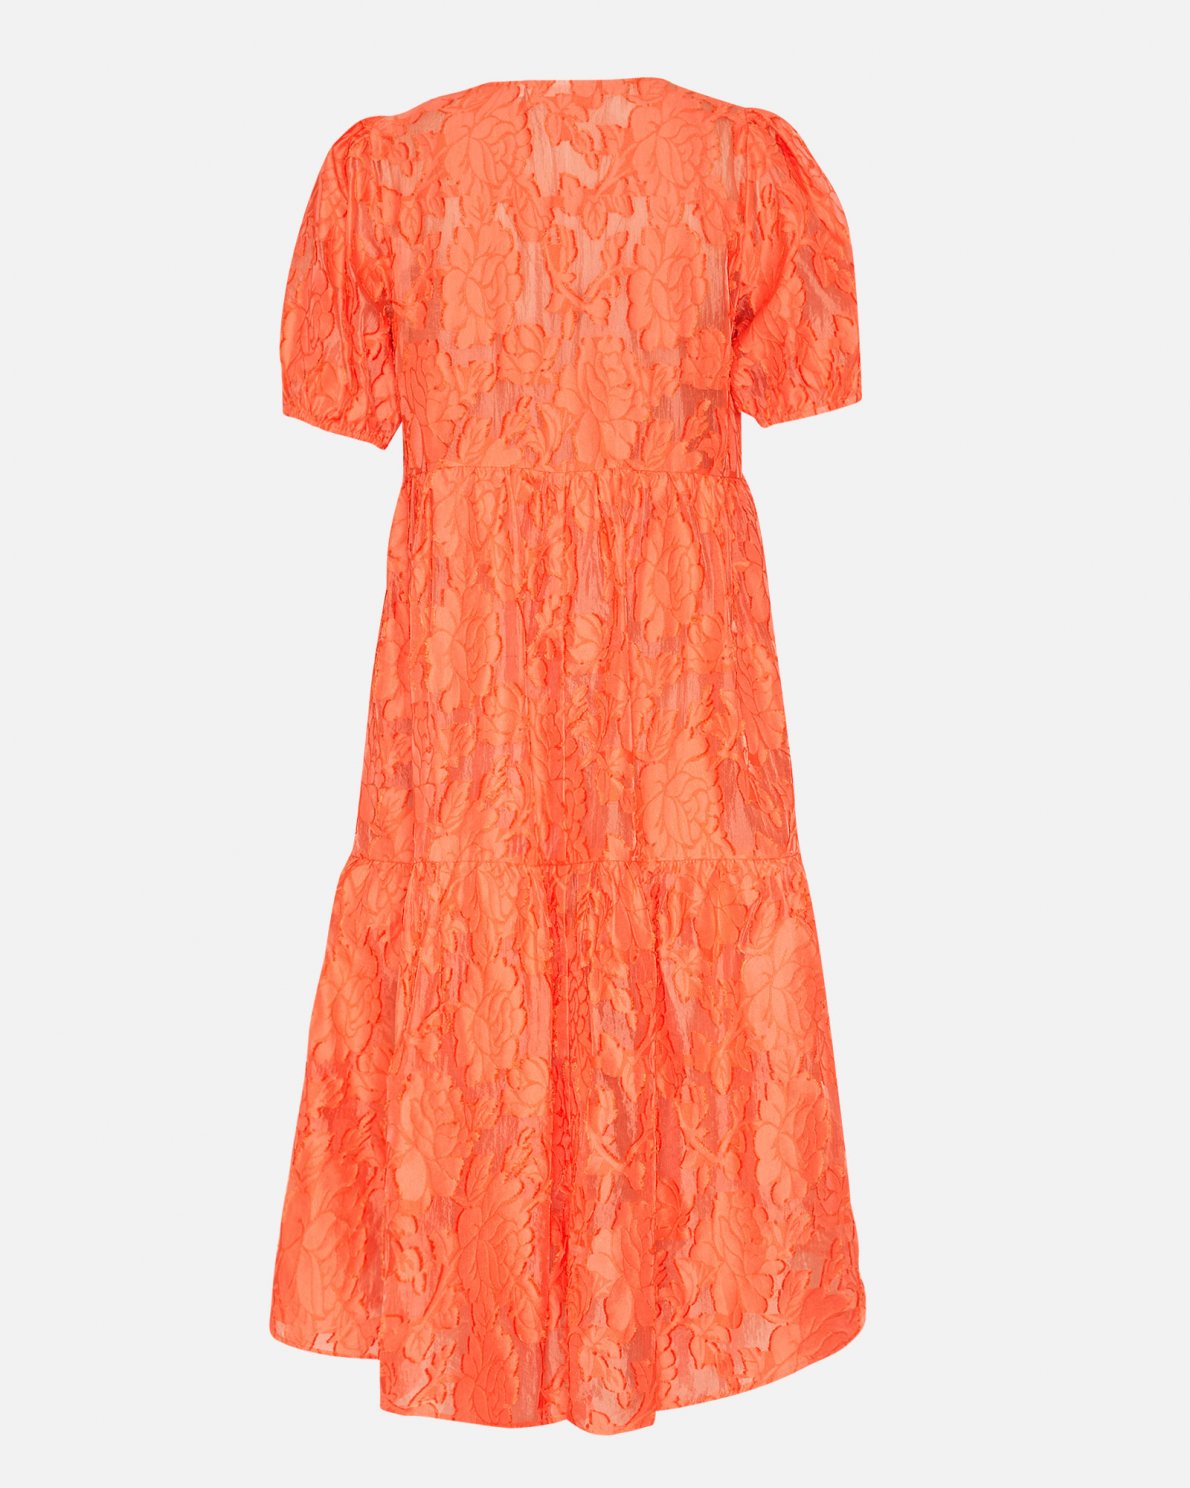 Pave SS Dress Persimmon